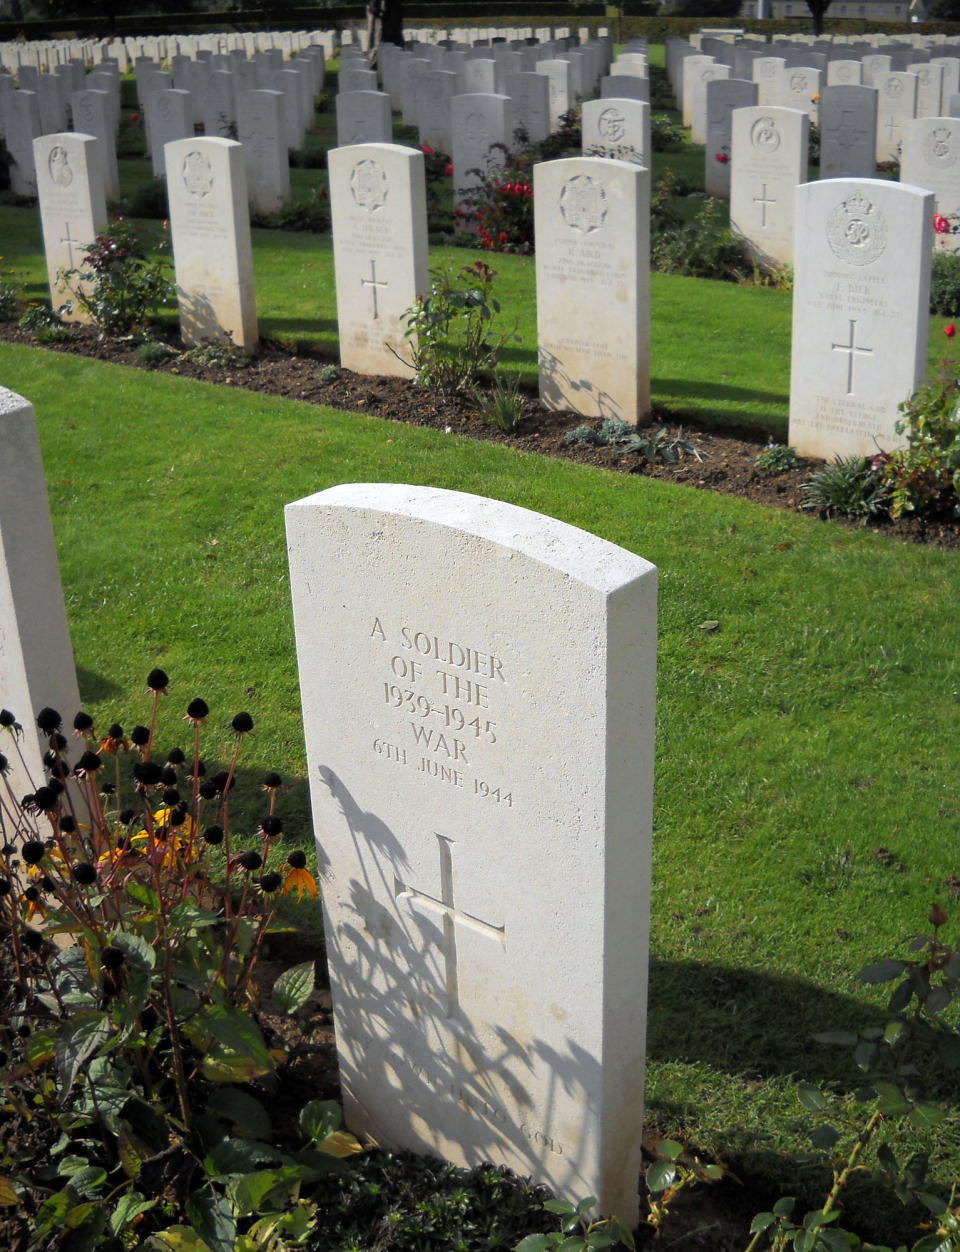 This Oct. 12, 2013 photo shows the graves of British soldiers killed on D-Day and during the ensuing battles of World War II occupy a cemetery in Bayeux, France. Bayeux sits just a few miles from the beaches of Normandy where Allied forces invaded in 1944. (AP Photo/Kathy Matheson)